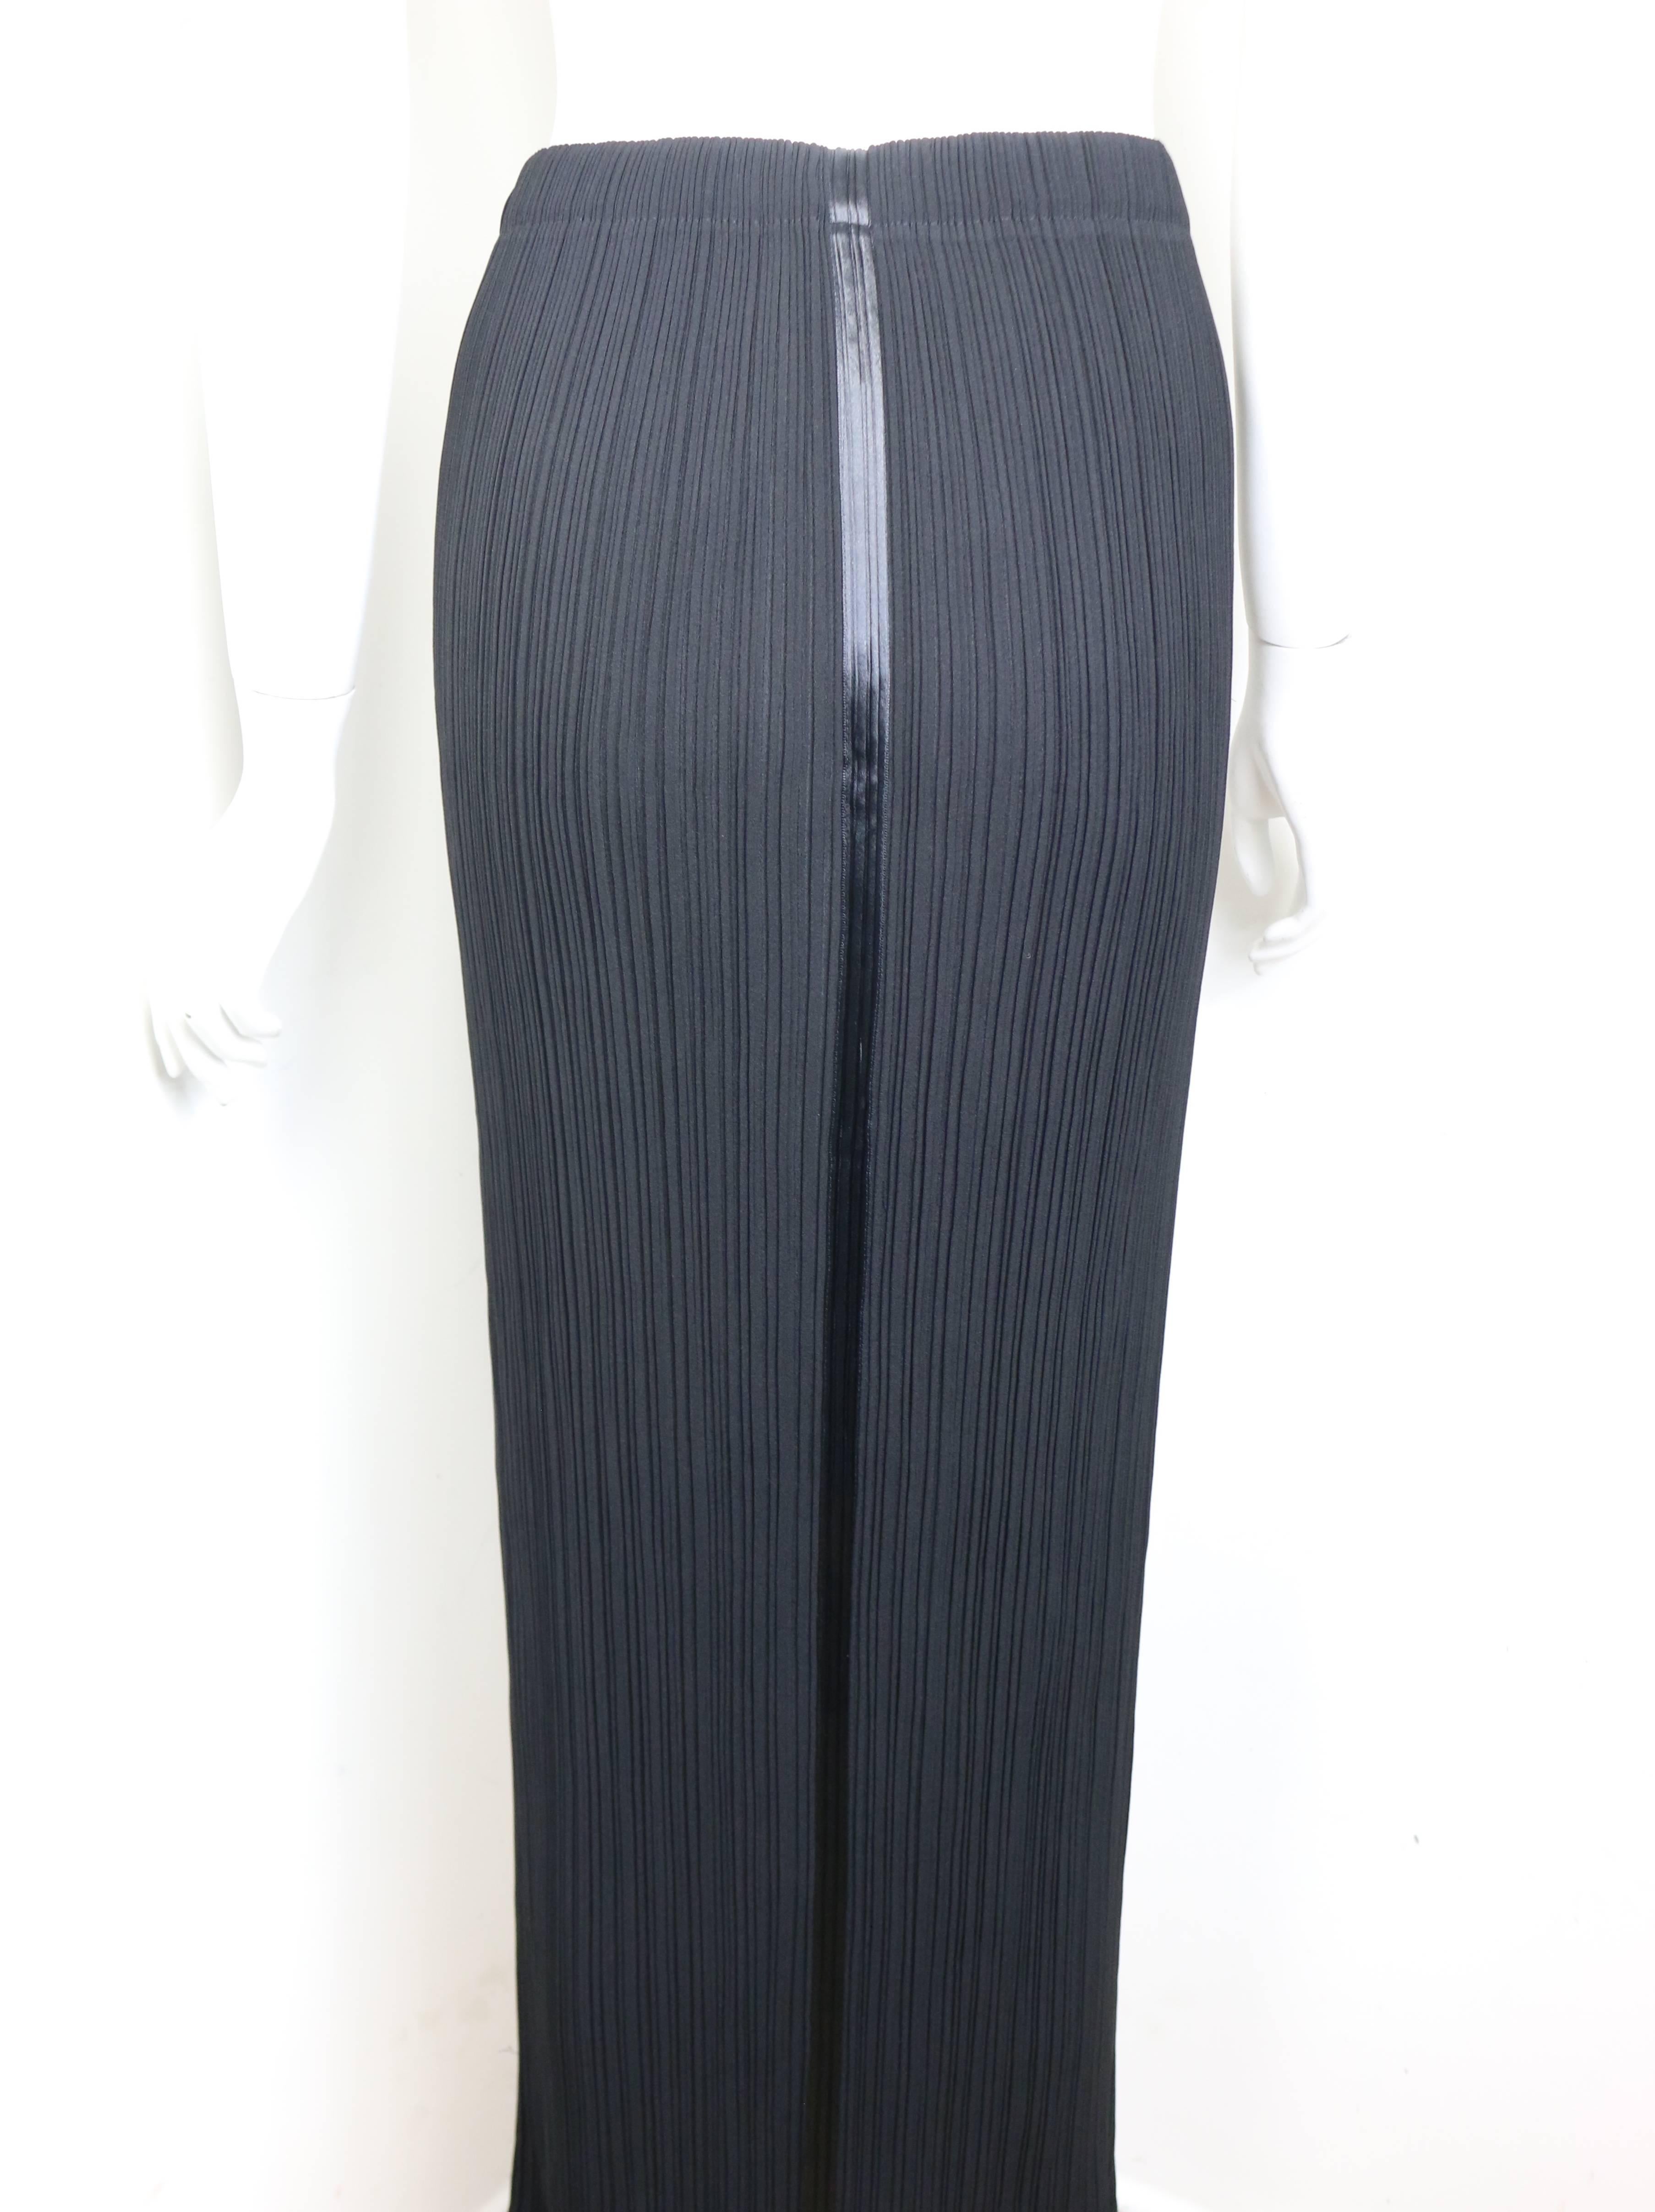 Issey Miyake Black Pleated Long Coat and Skirt Ensemble  For Sale 3